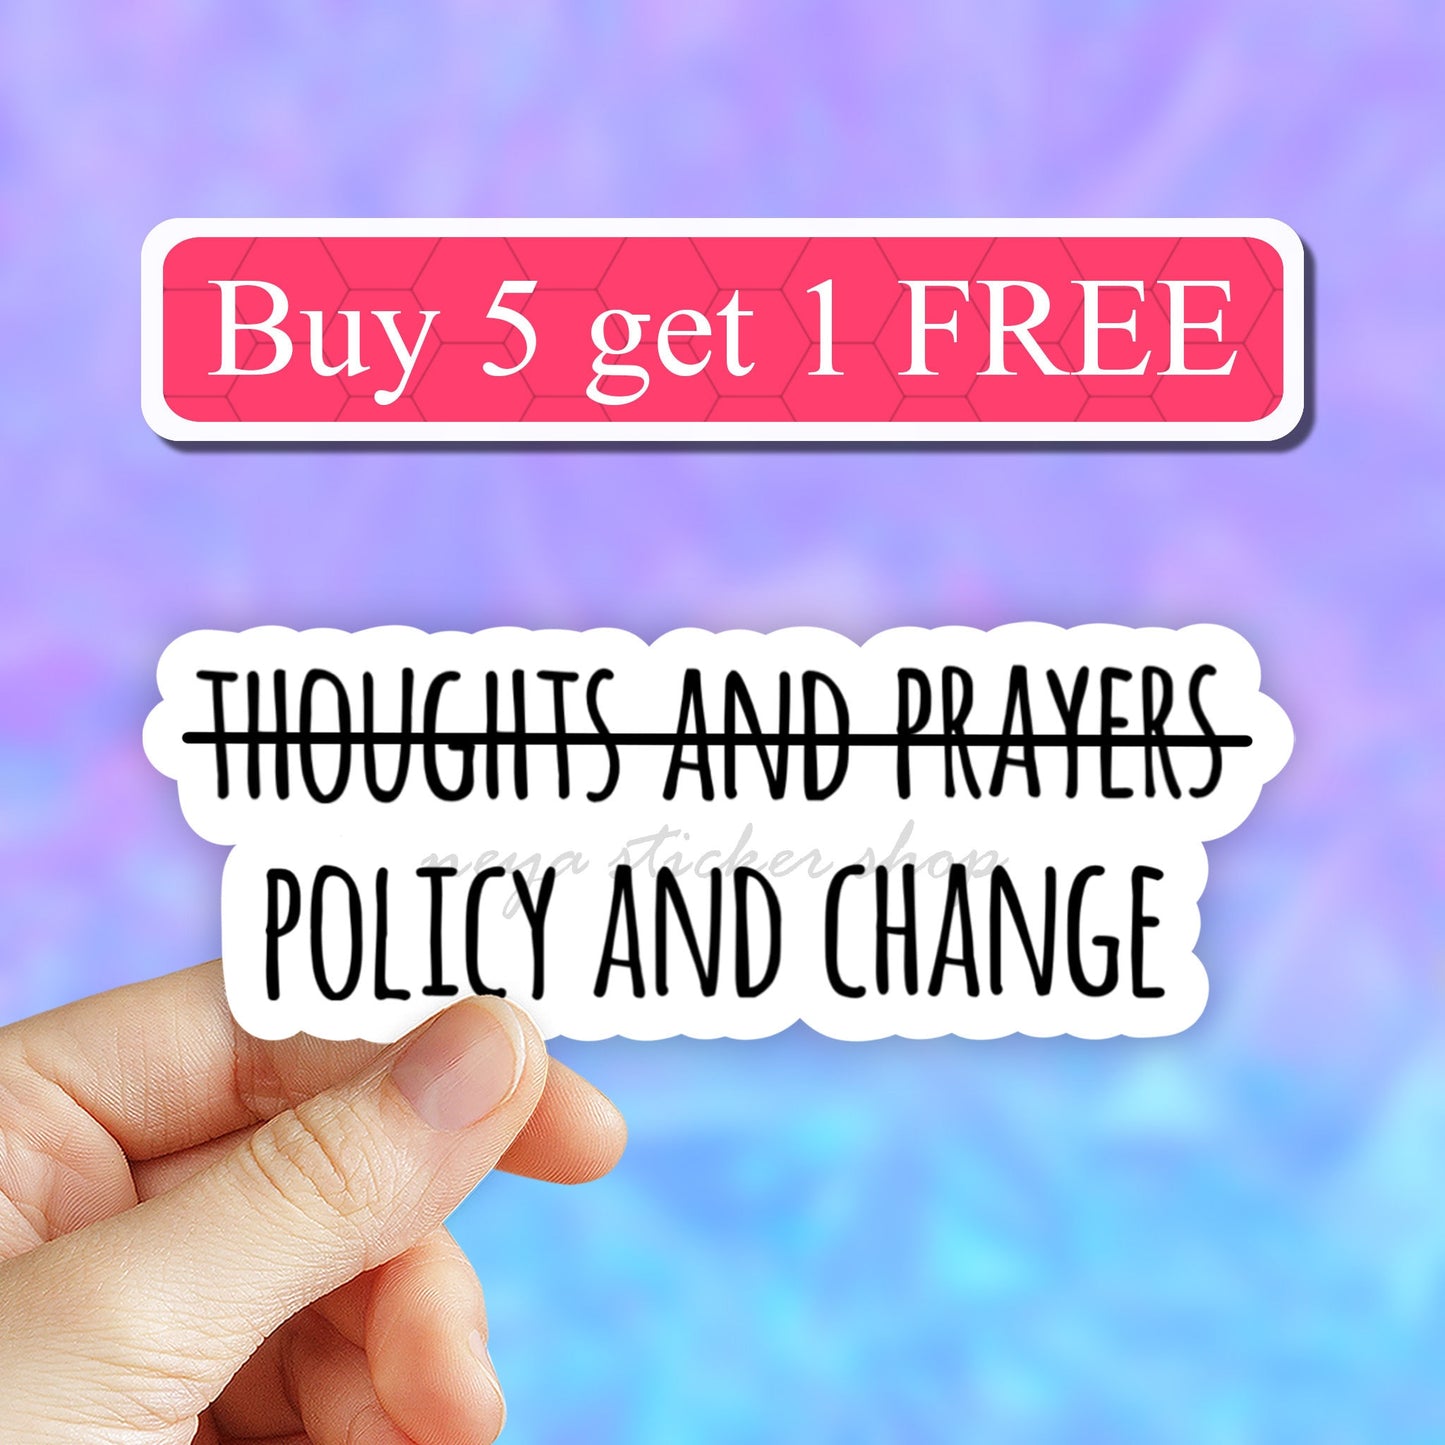 Thoughts and Prayers Policy and Change Sticker, Laptop Stickers, Aesthetic Stickers, Vinyl Stickers, Computer Waterbottle Decal